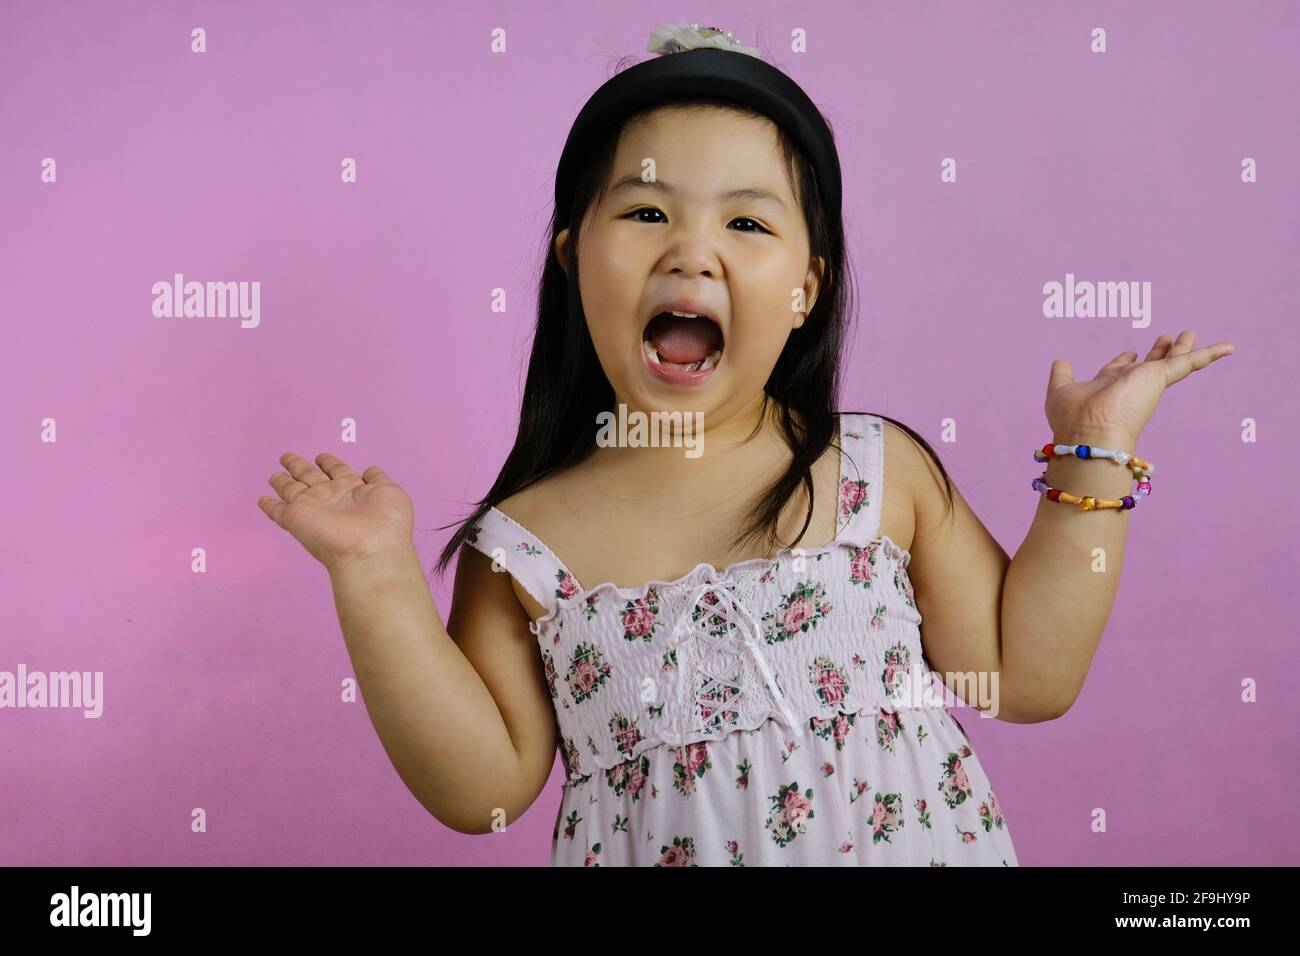 A cute young chubby Asian girl feeling excited, screaming, with her mouth wide open and her hands raised, with pink background. Stock Photo